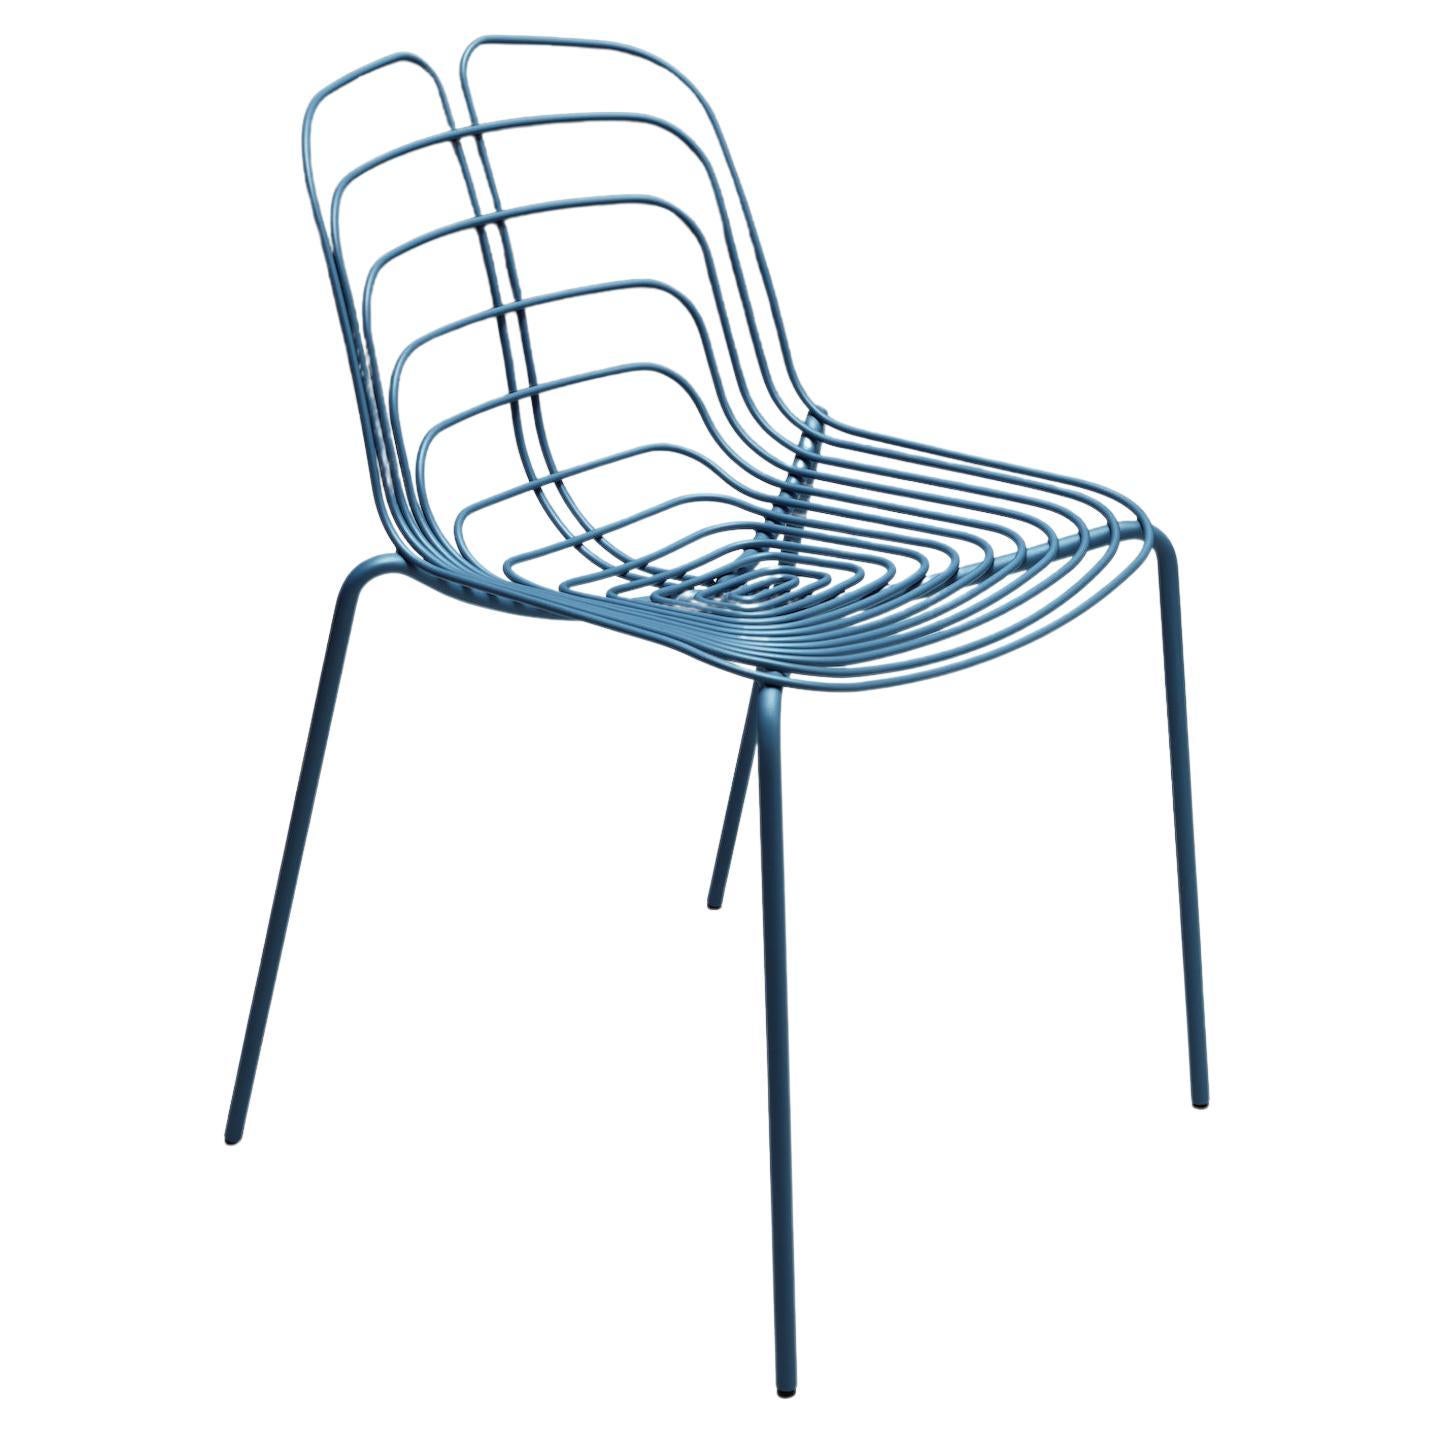 La Manufacture-Paris Wired Outdoor Chair Designed by Michael Young